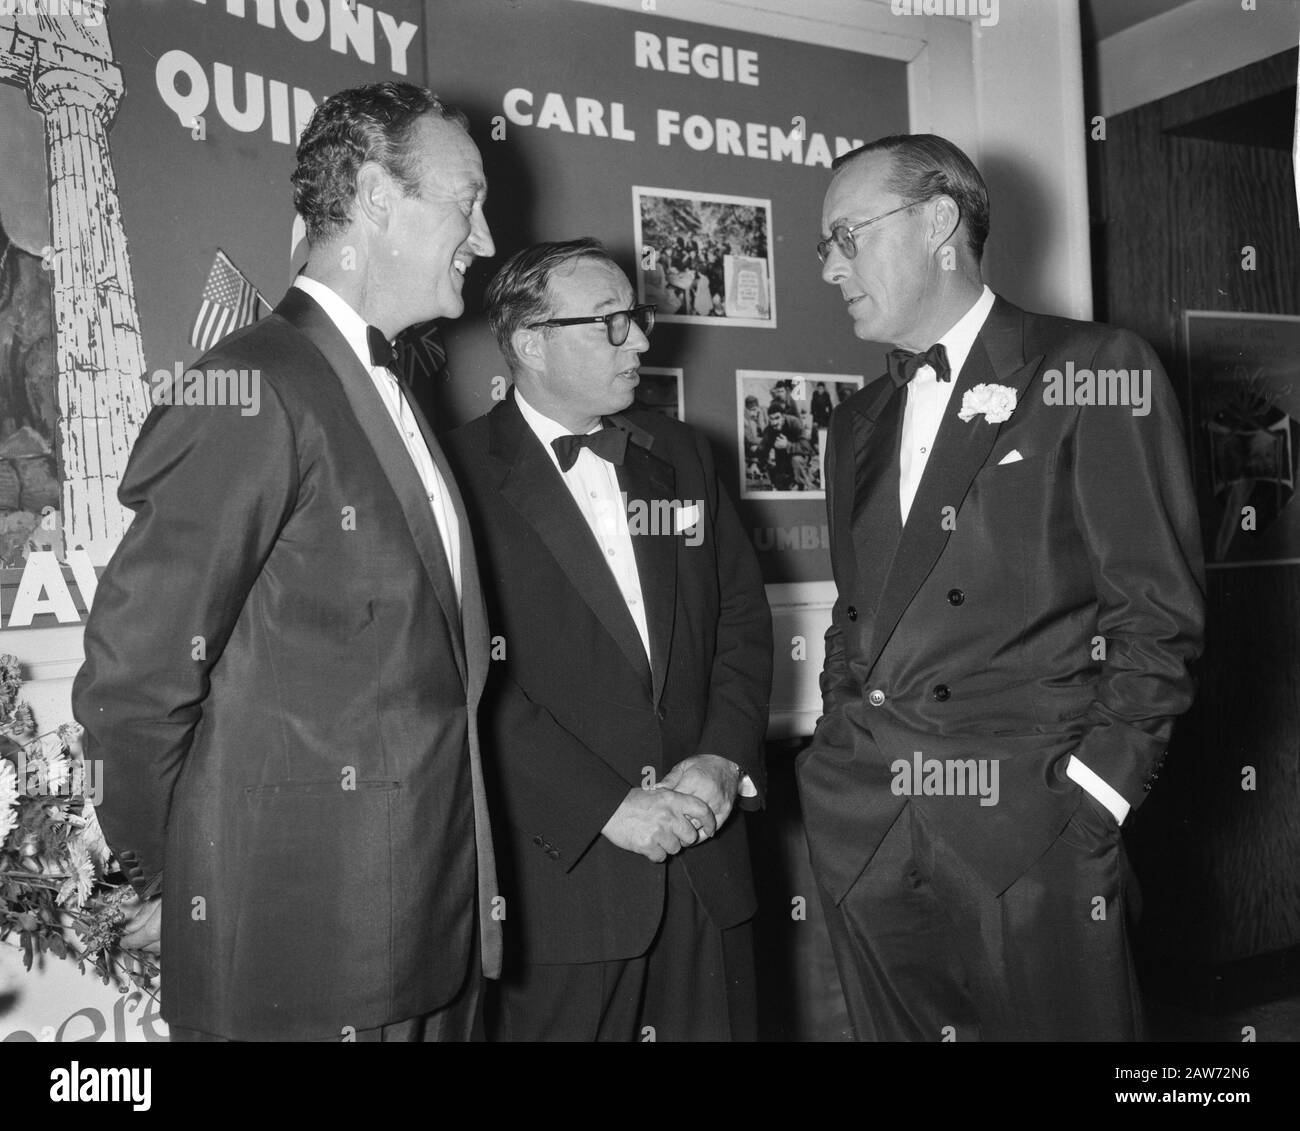 Prince Bernhard attends gala screening of the film The Guns of Navarone in. David Niven (left), Carl Foreman (screenplay) and Prince Bernhard Date: October 6, 1961 Keywords: actors, theaters, movies, movie stars, royalty, princes Person Name: Bernhard (prince Netherlands), Foreman Carl, Niven, David Stock Photo